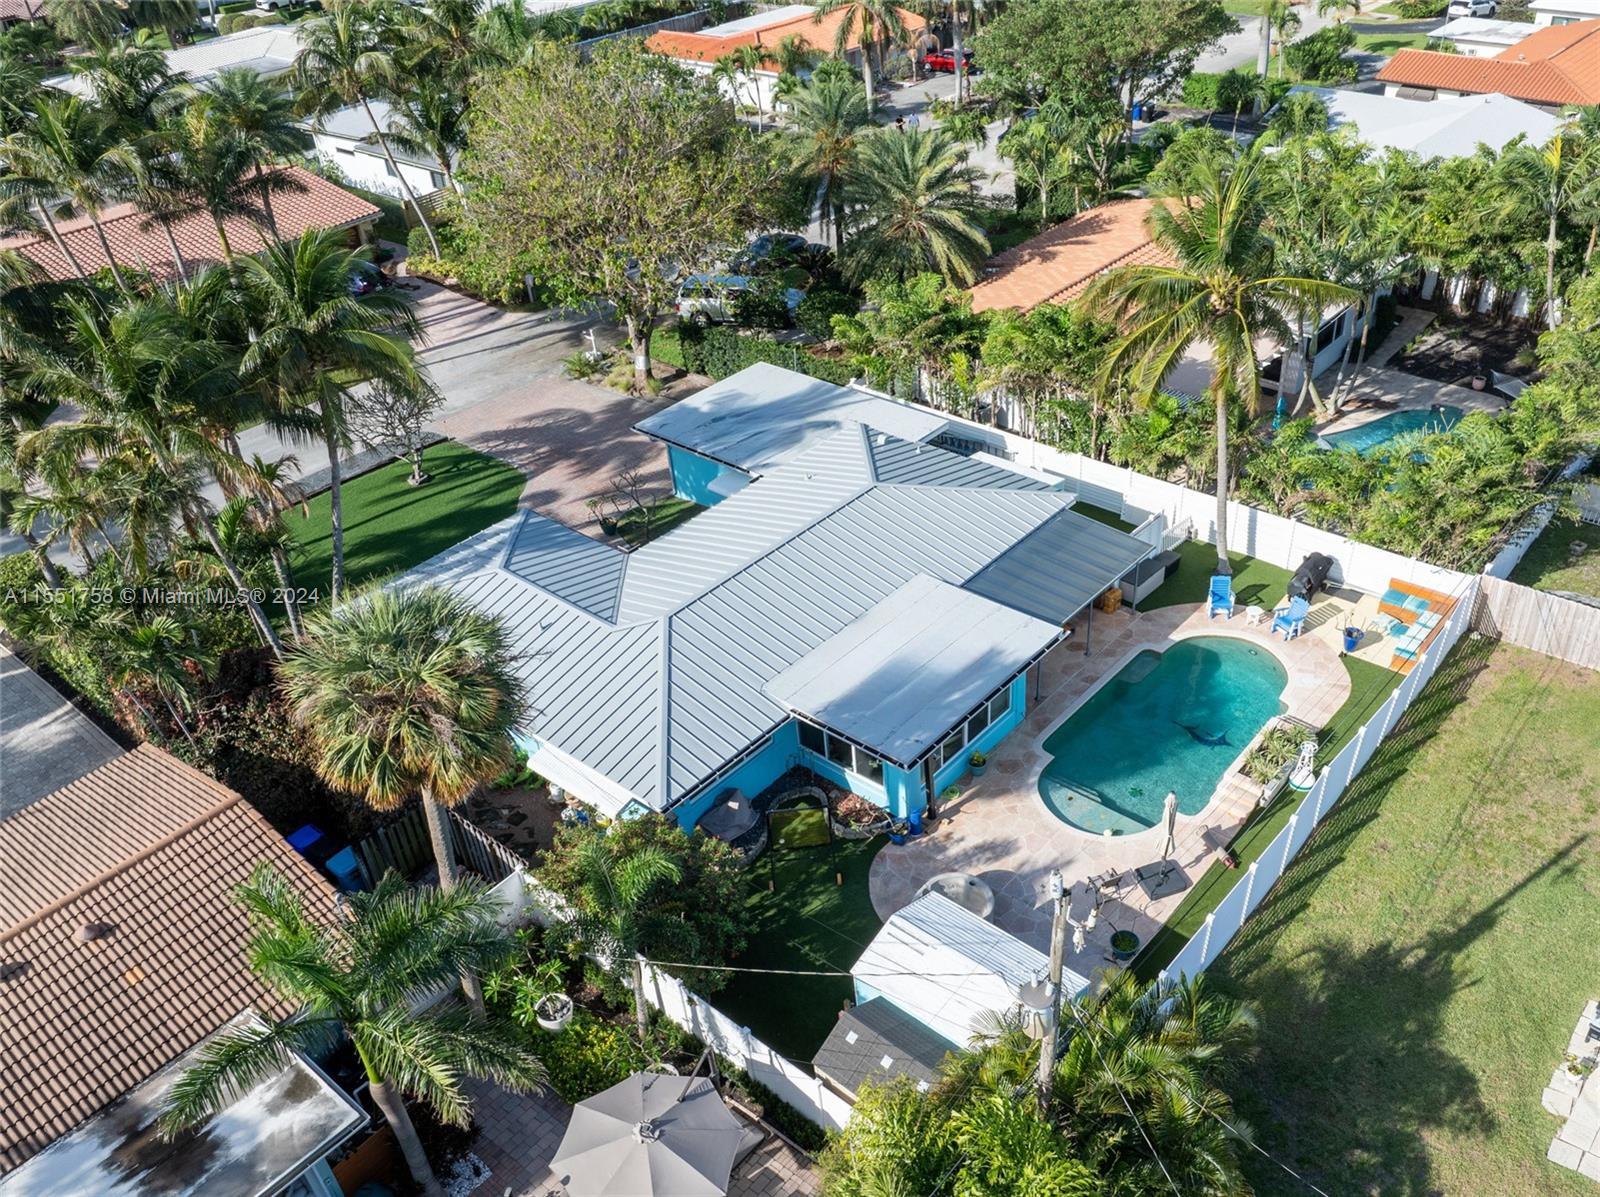 Spacious pool home in sought-after Bel-Air situated in charming beach town.New metal roof, flat roof